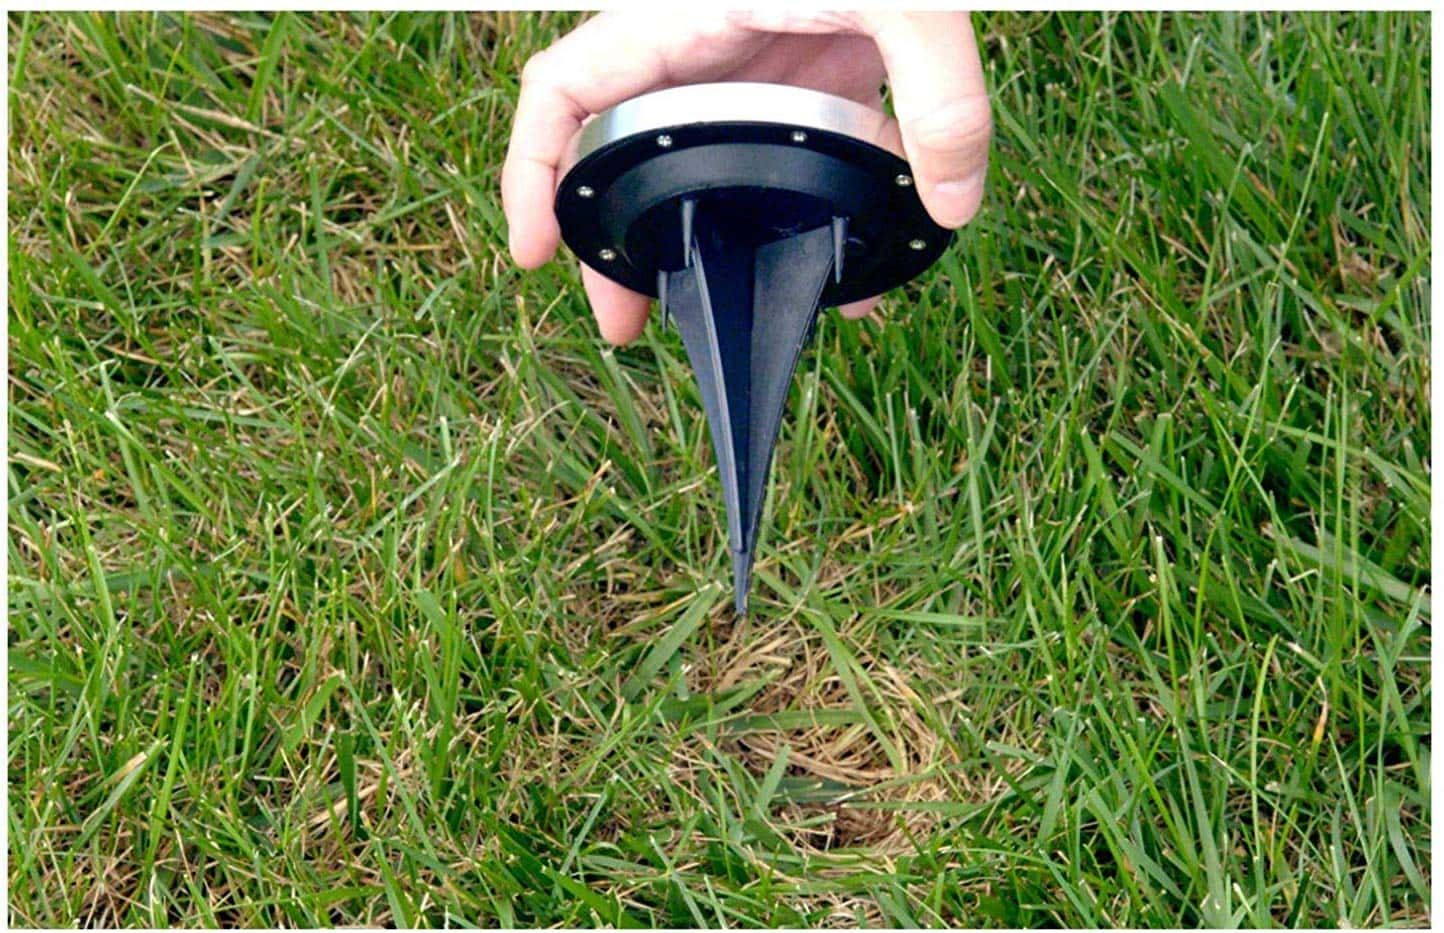 upclose of hand holding a disk light ready to be install on lawn.